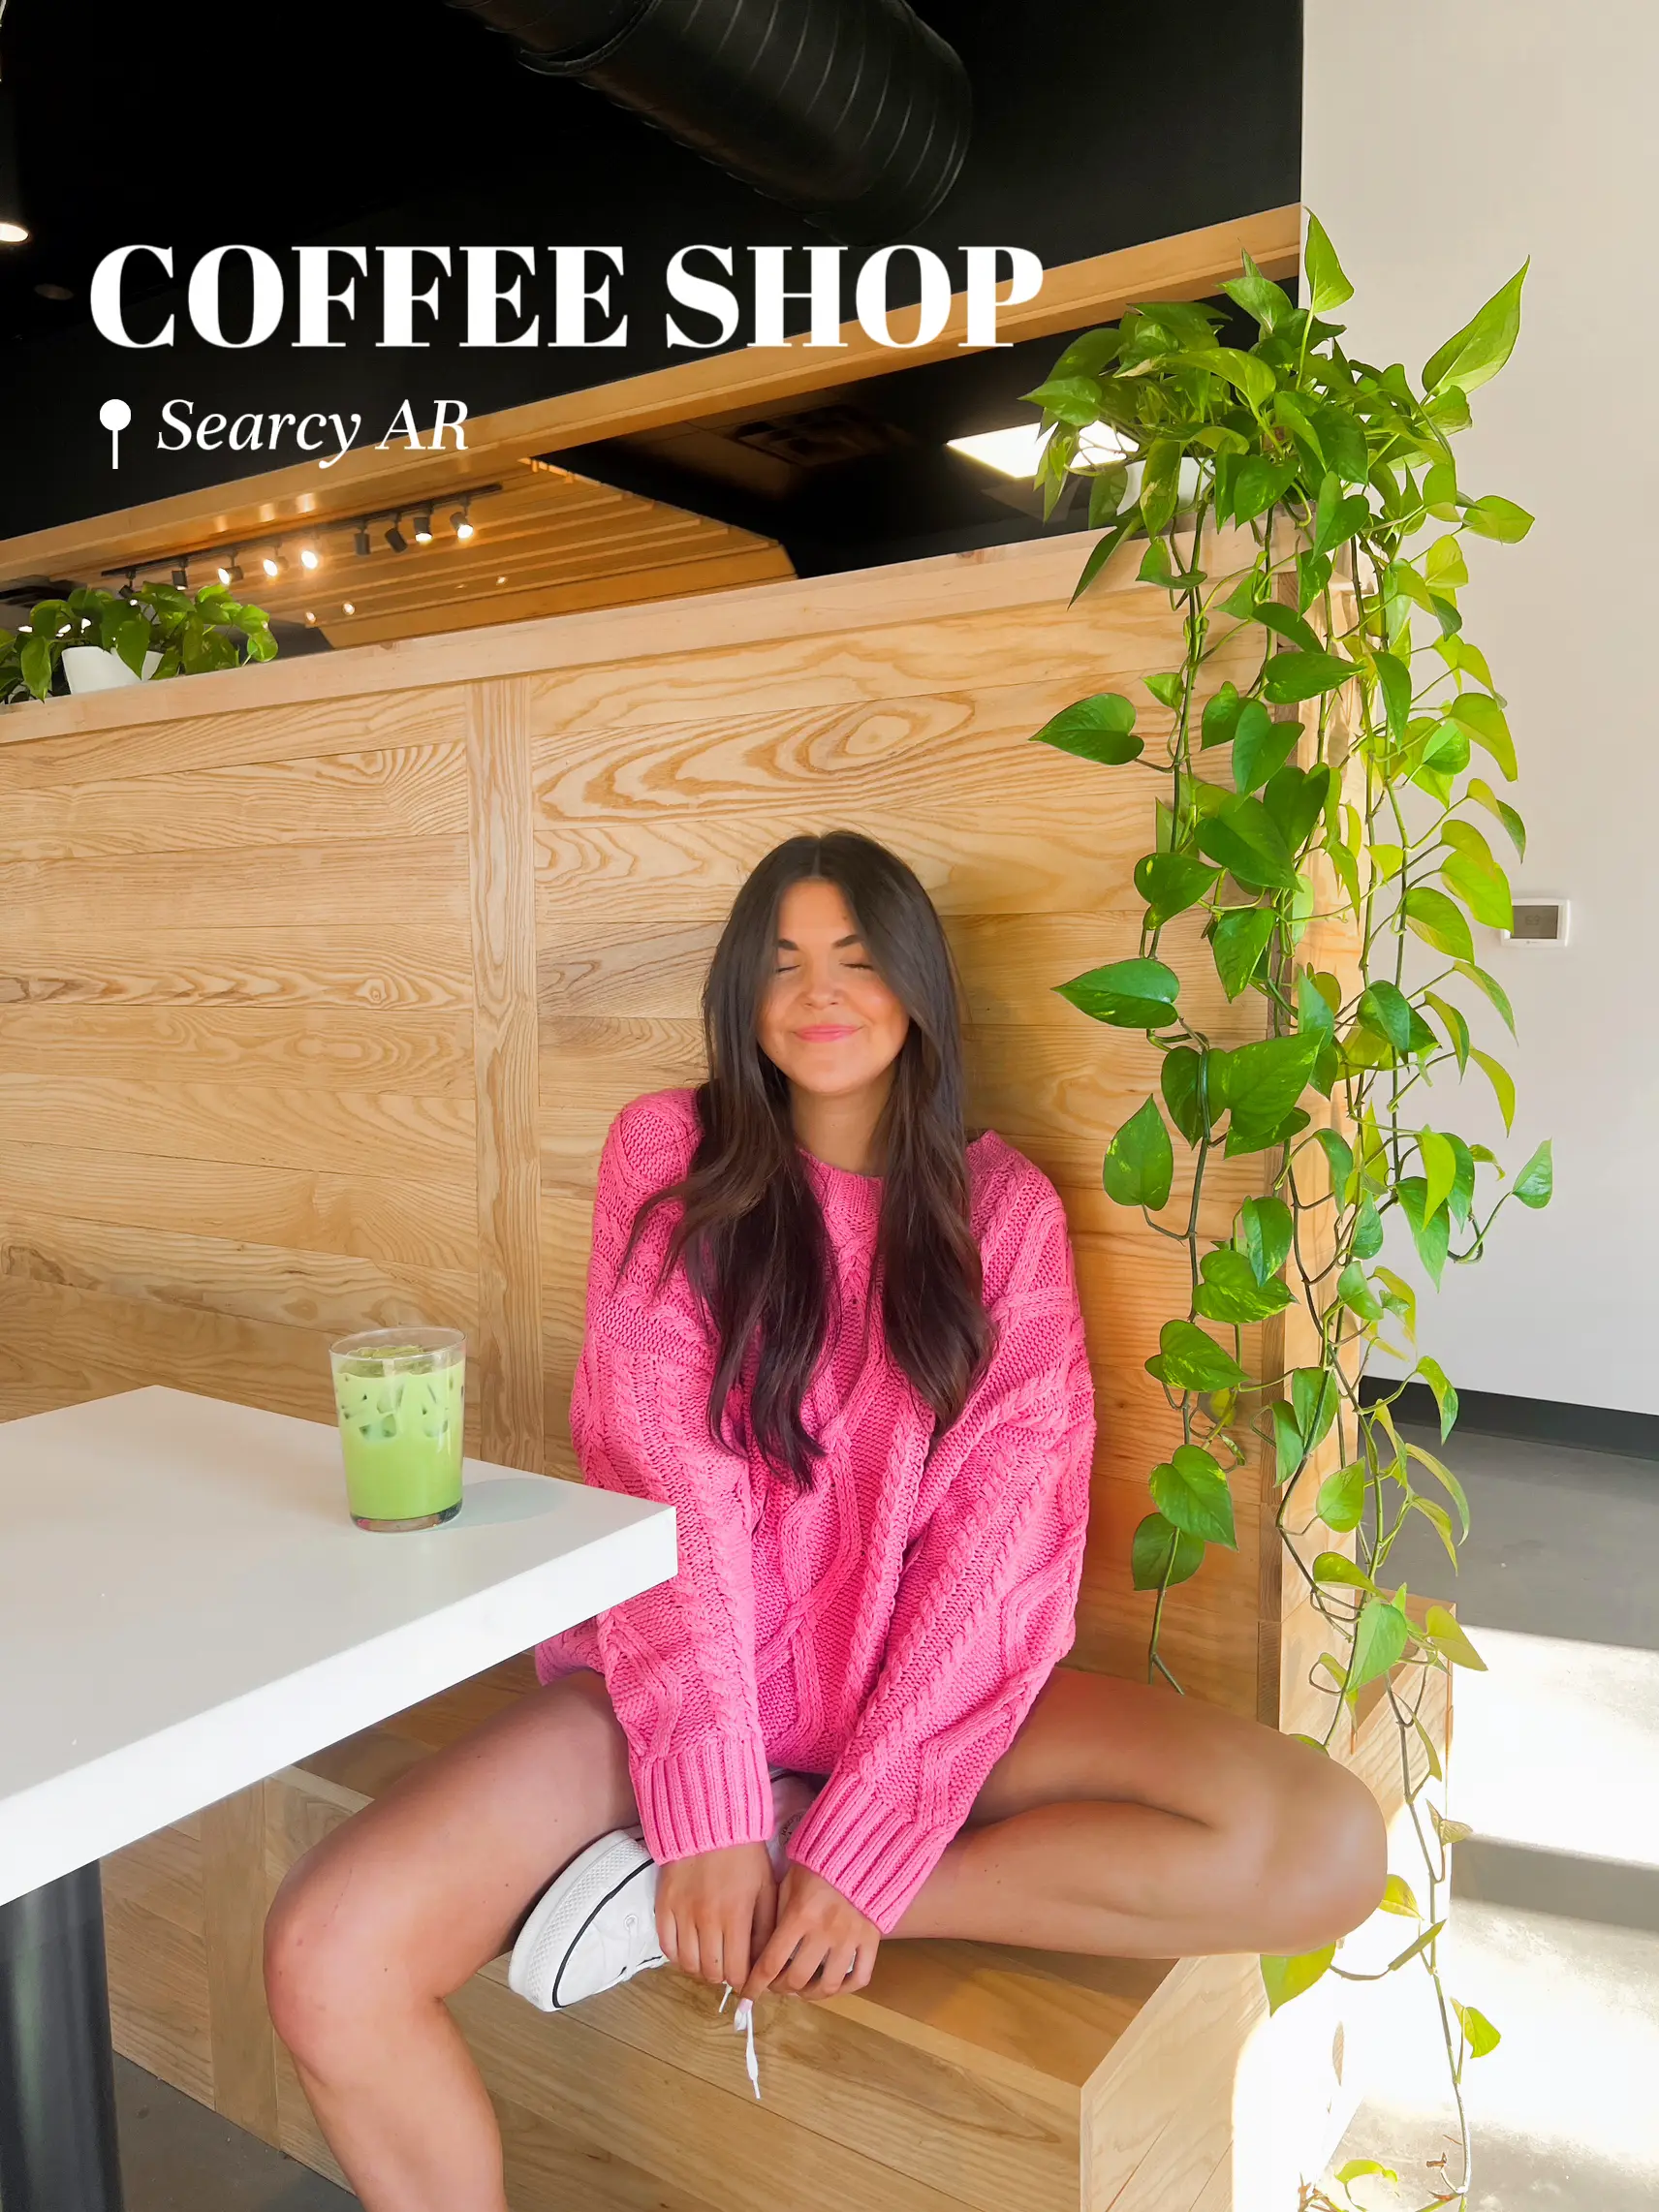  A woman in a pink sweater is sitting on a bench at a coffee shop.